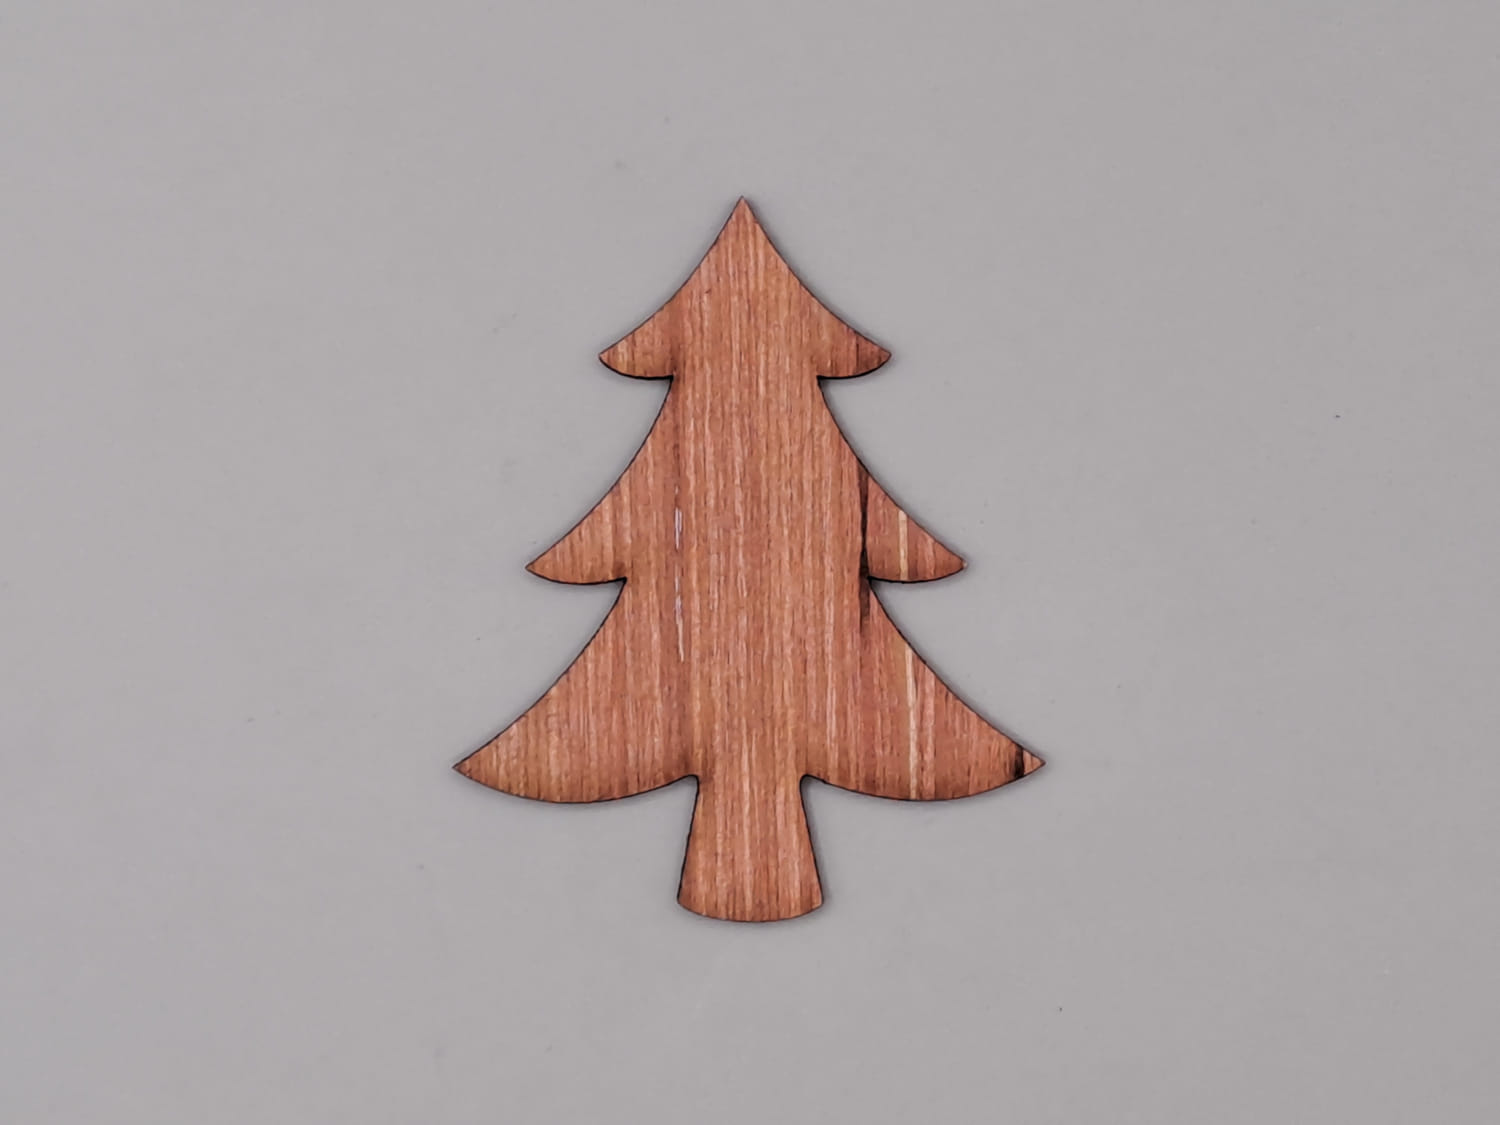 Laser Cut Christmas Tree Cut Out Wood Shape Free Vector